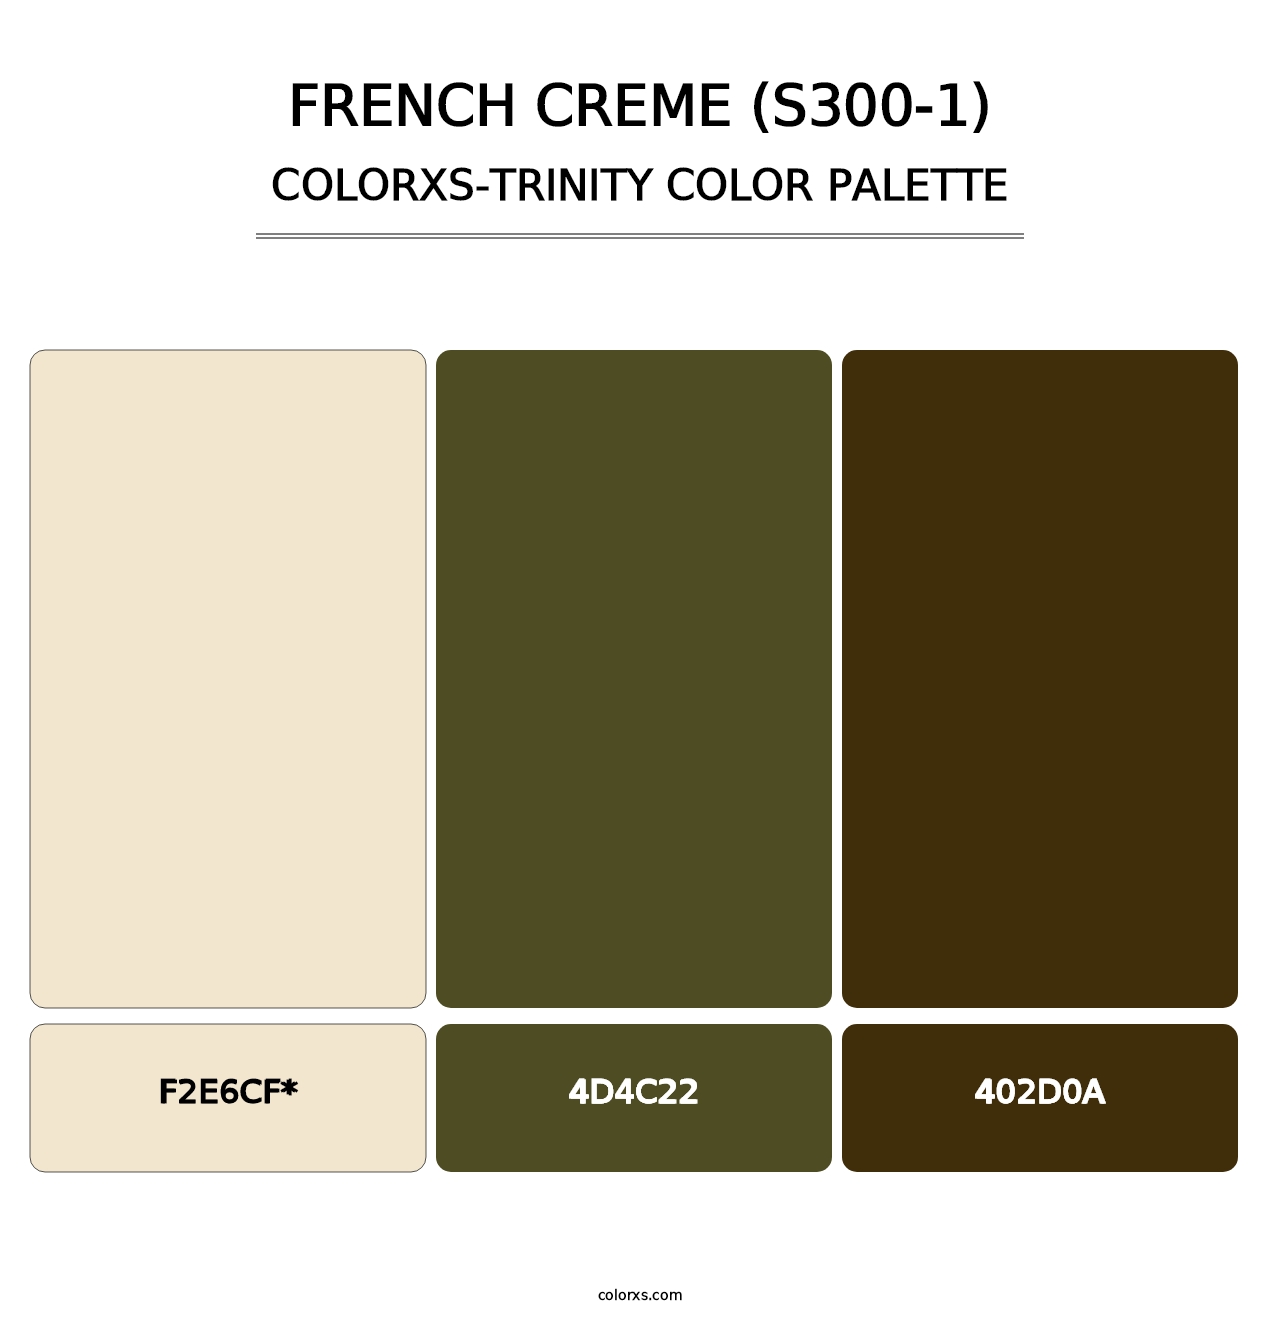 French Creme (S300-1) - Colorxs Trinity Palette